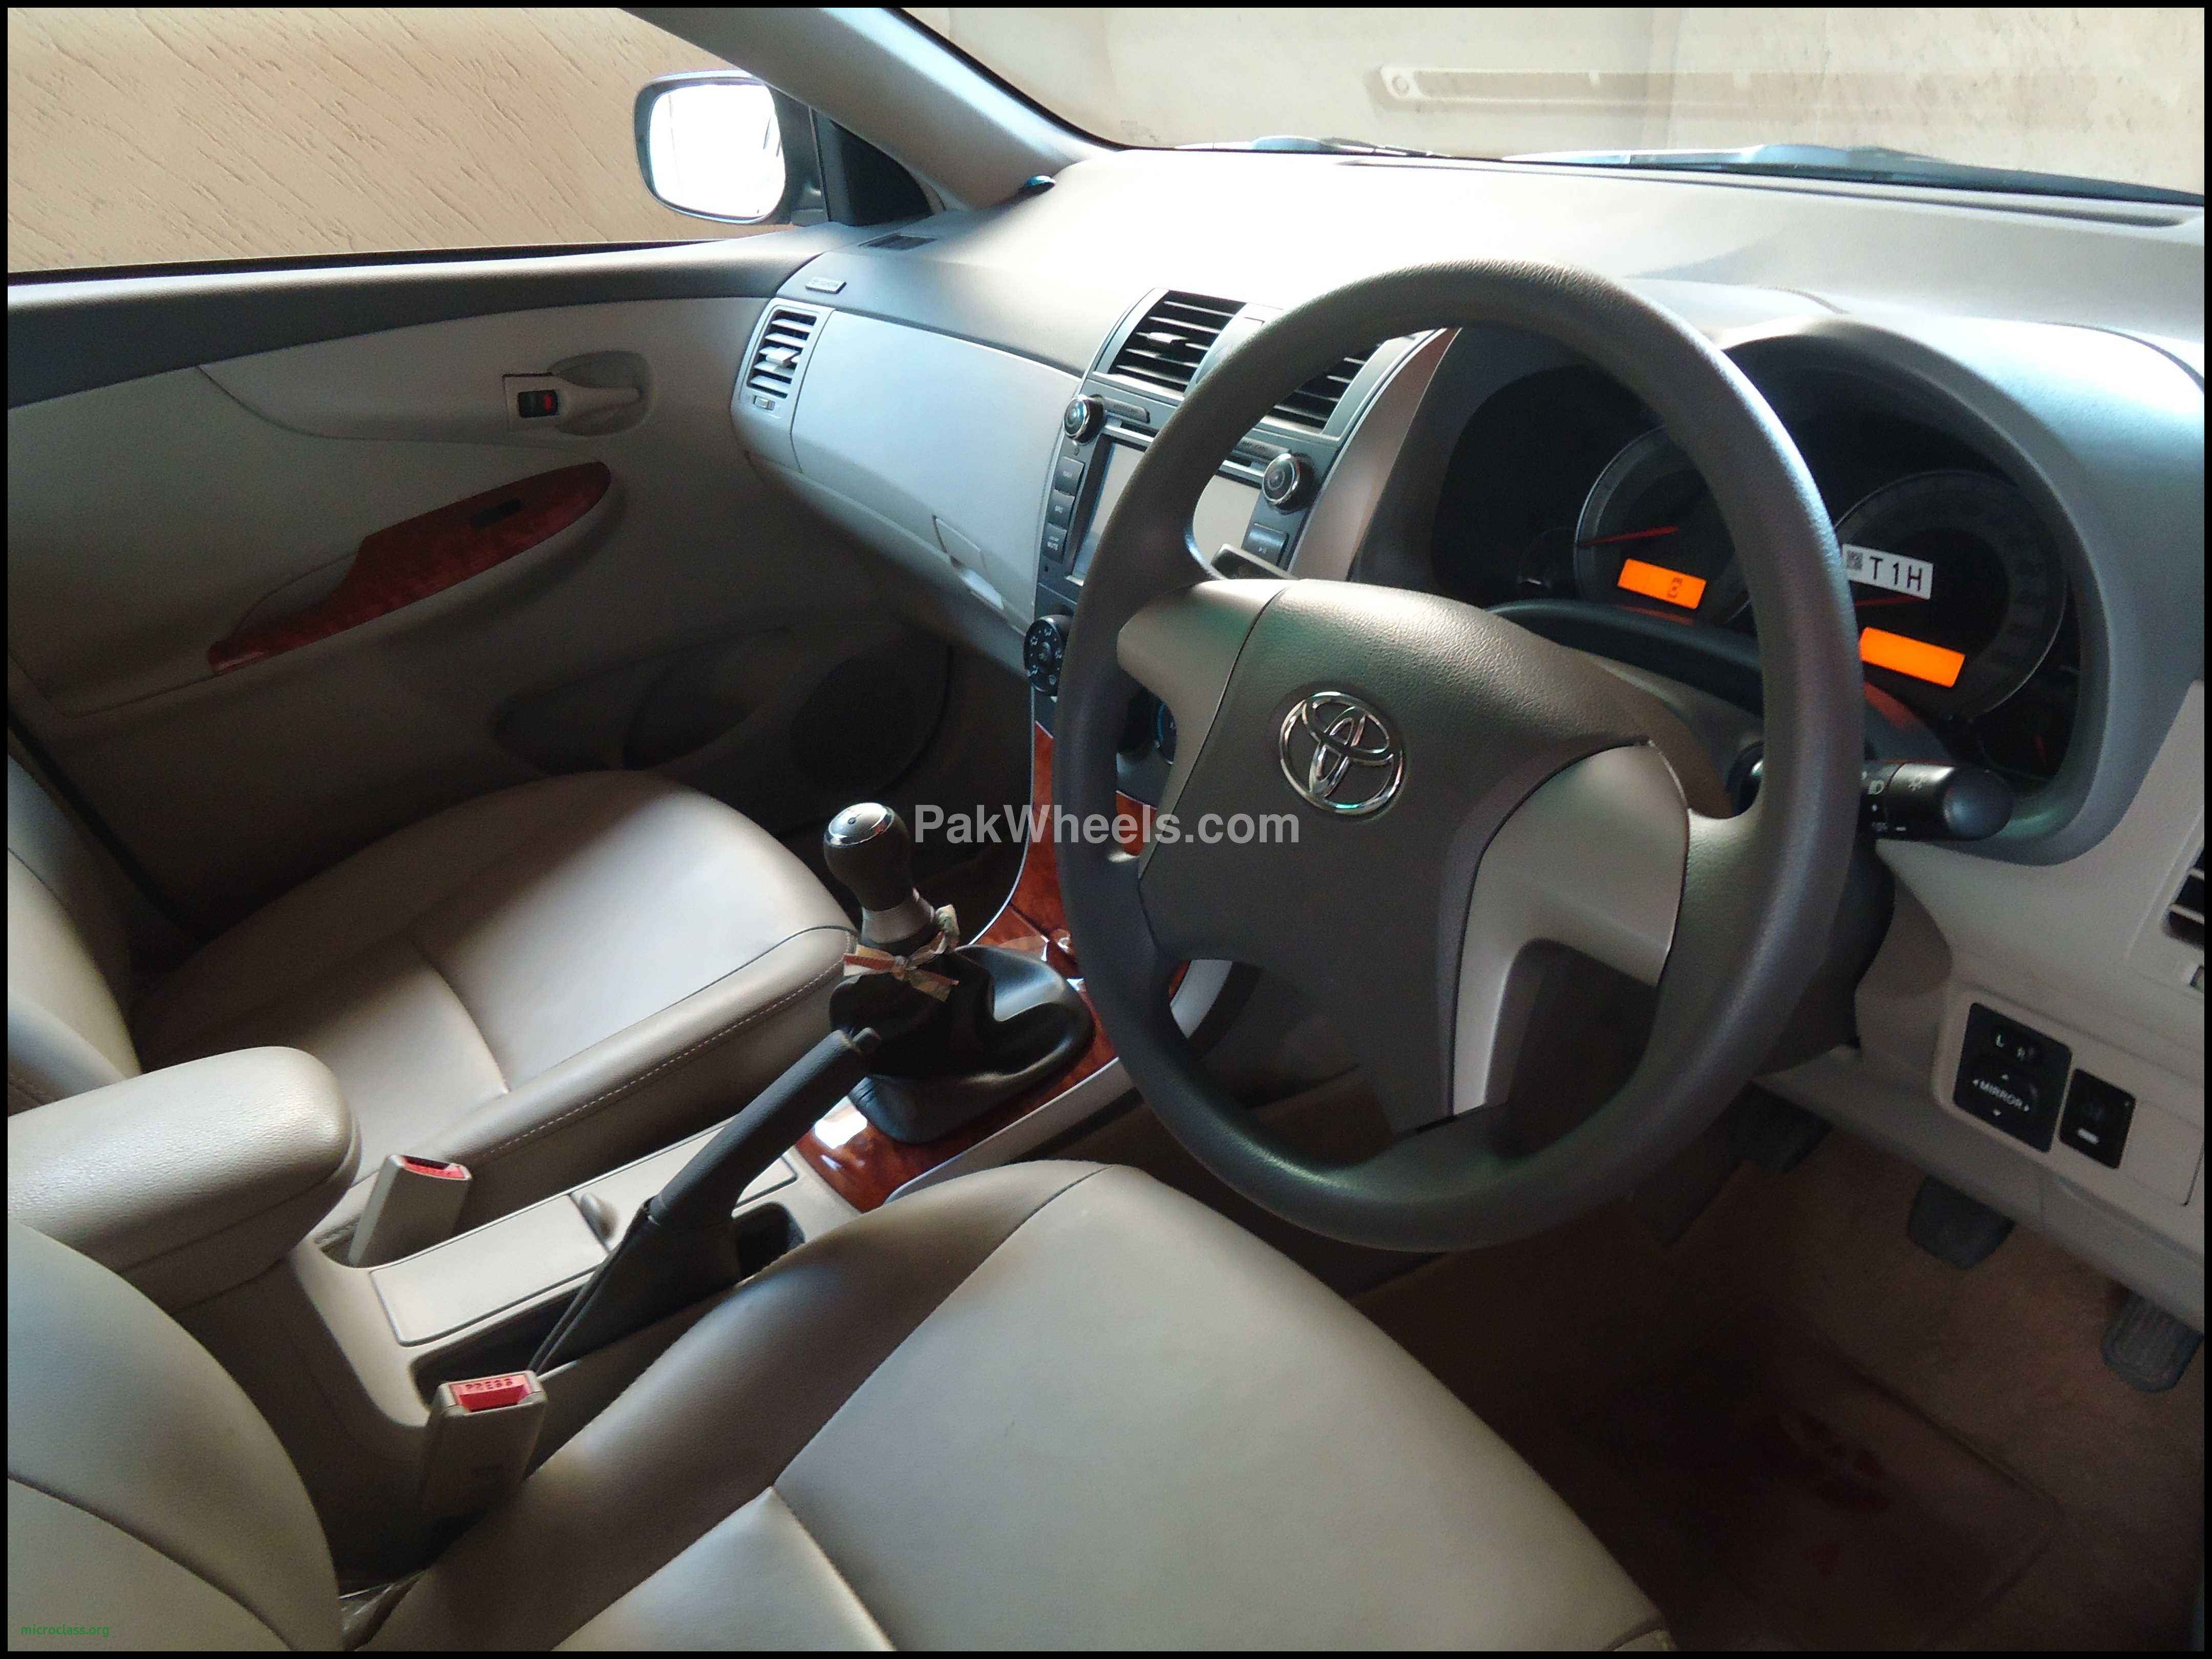 Hot New Camry for Sale toyota Corolla 2 0d Saloon Sr 2010 for Sale Beautiful